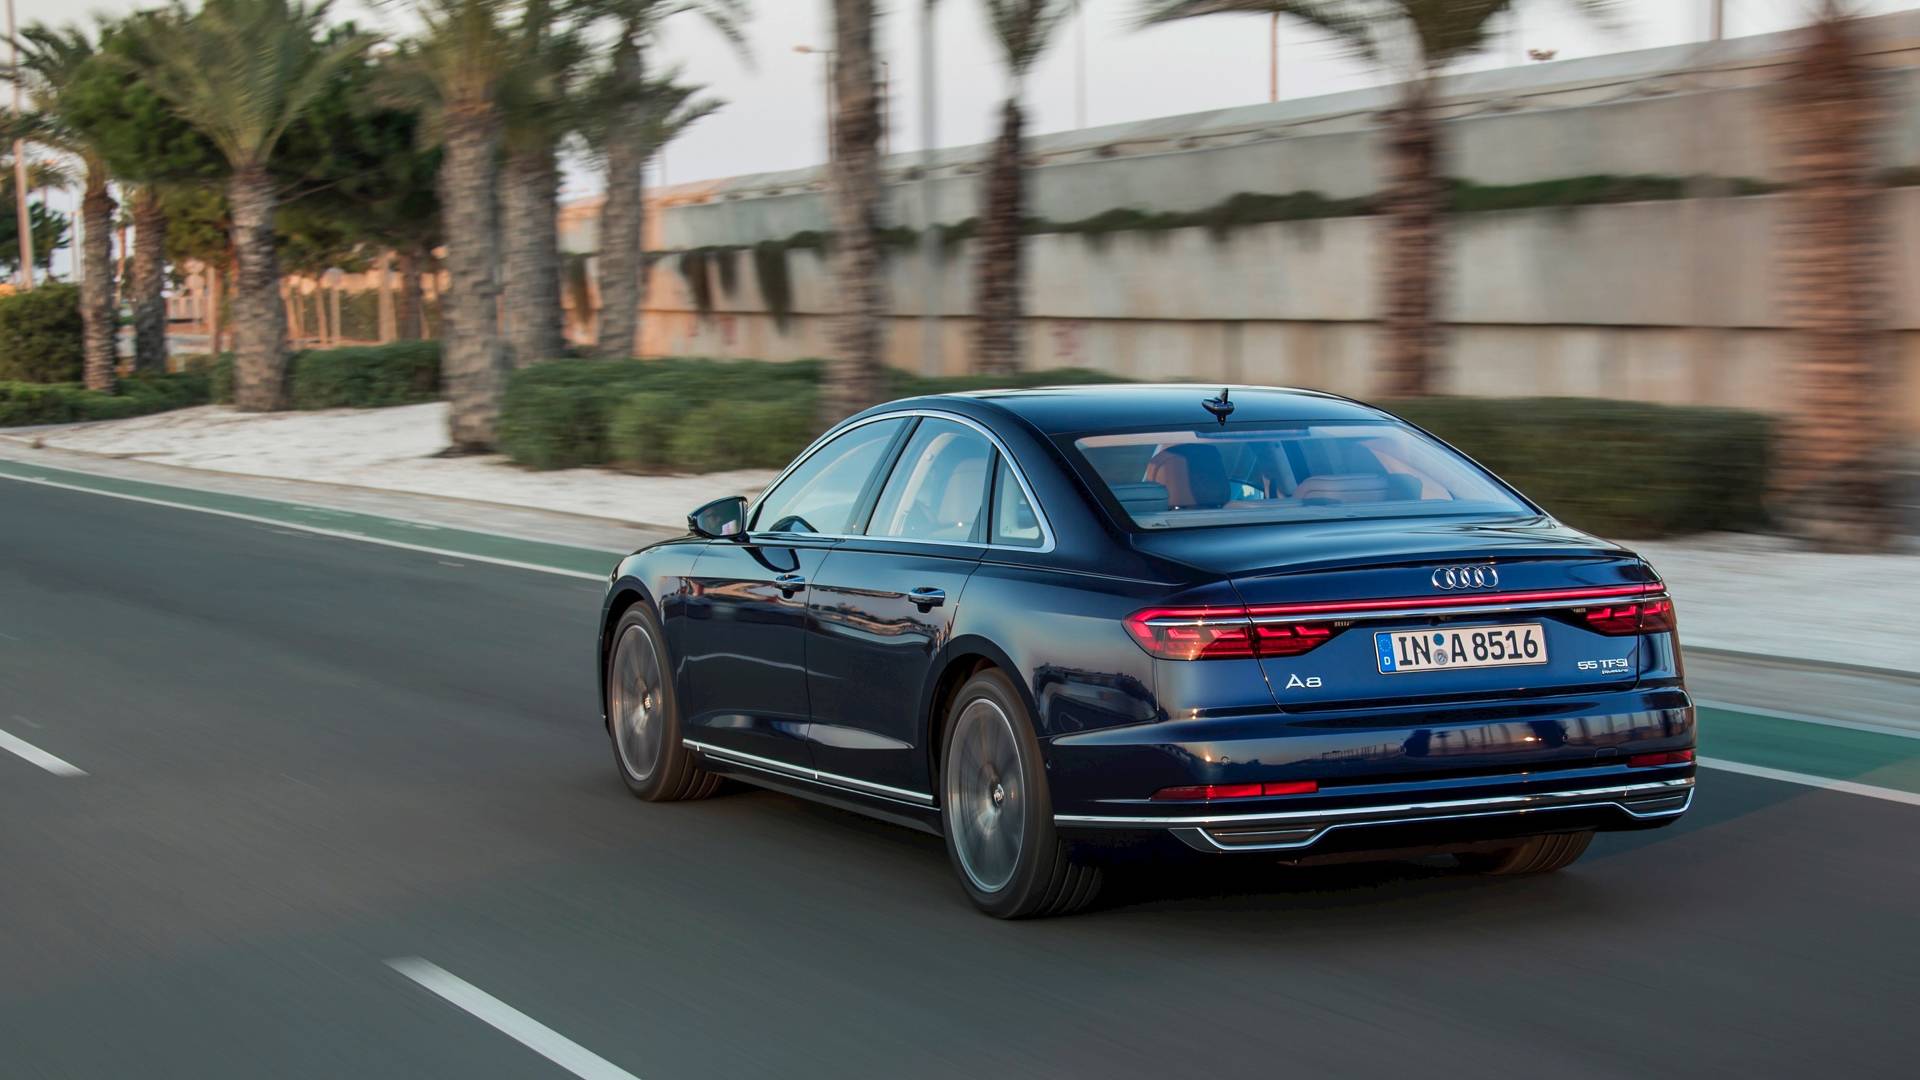 Audi A8 50 TDI first drive: reconnaissance into the future